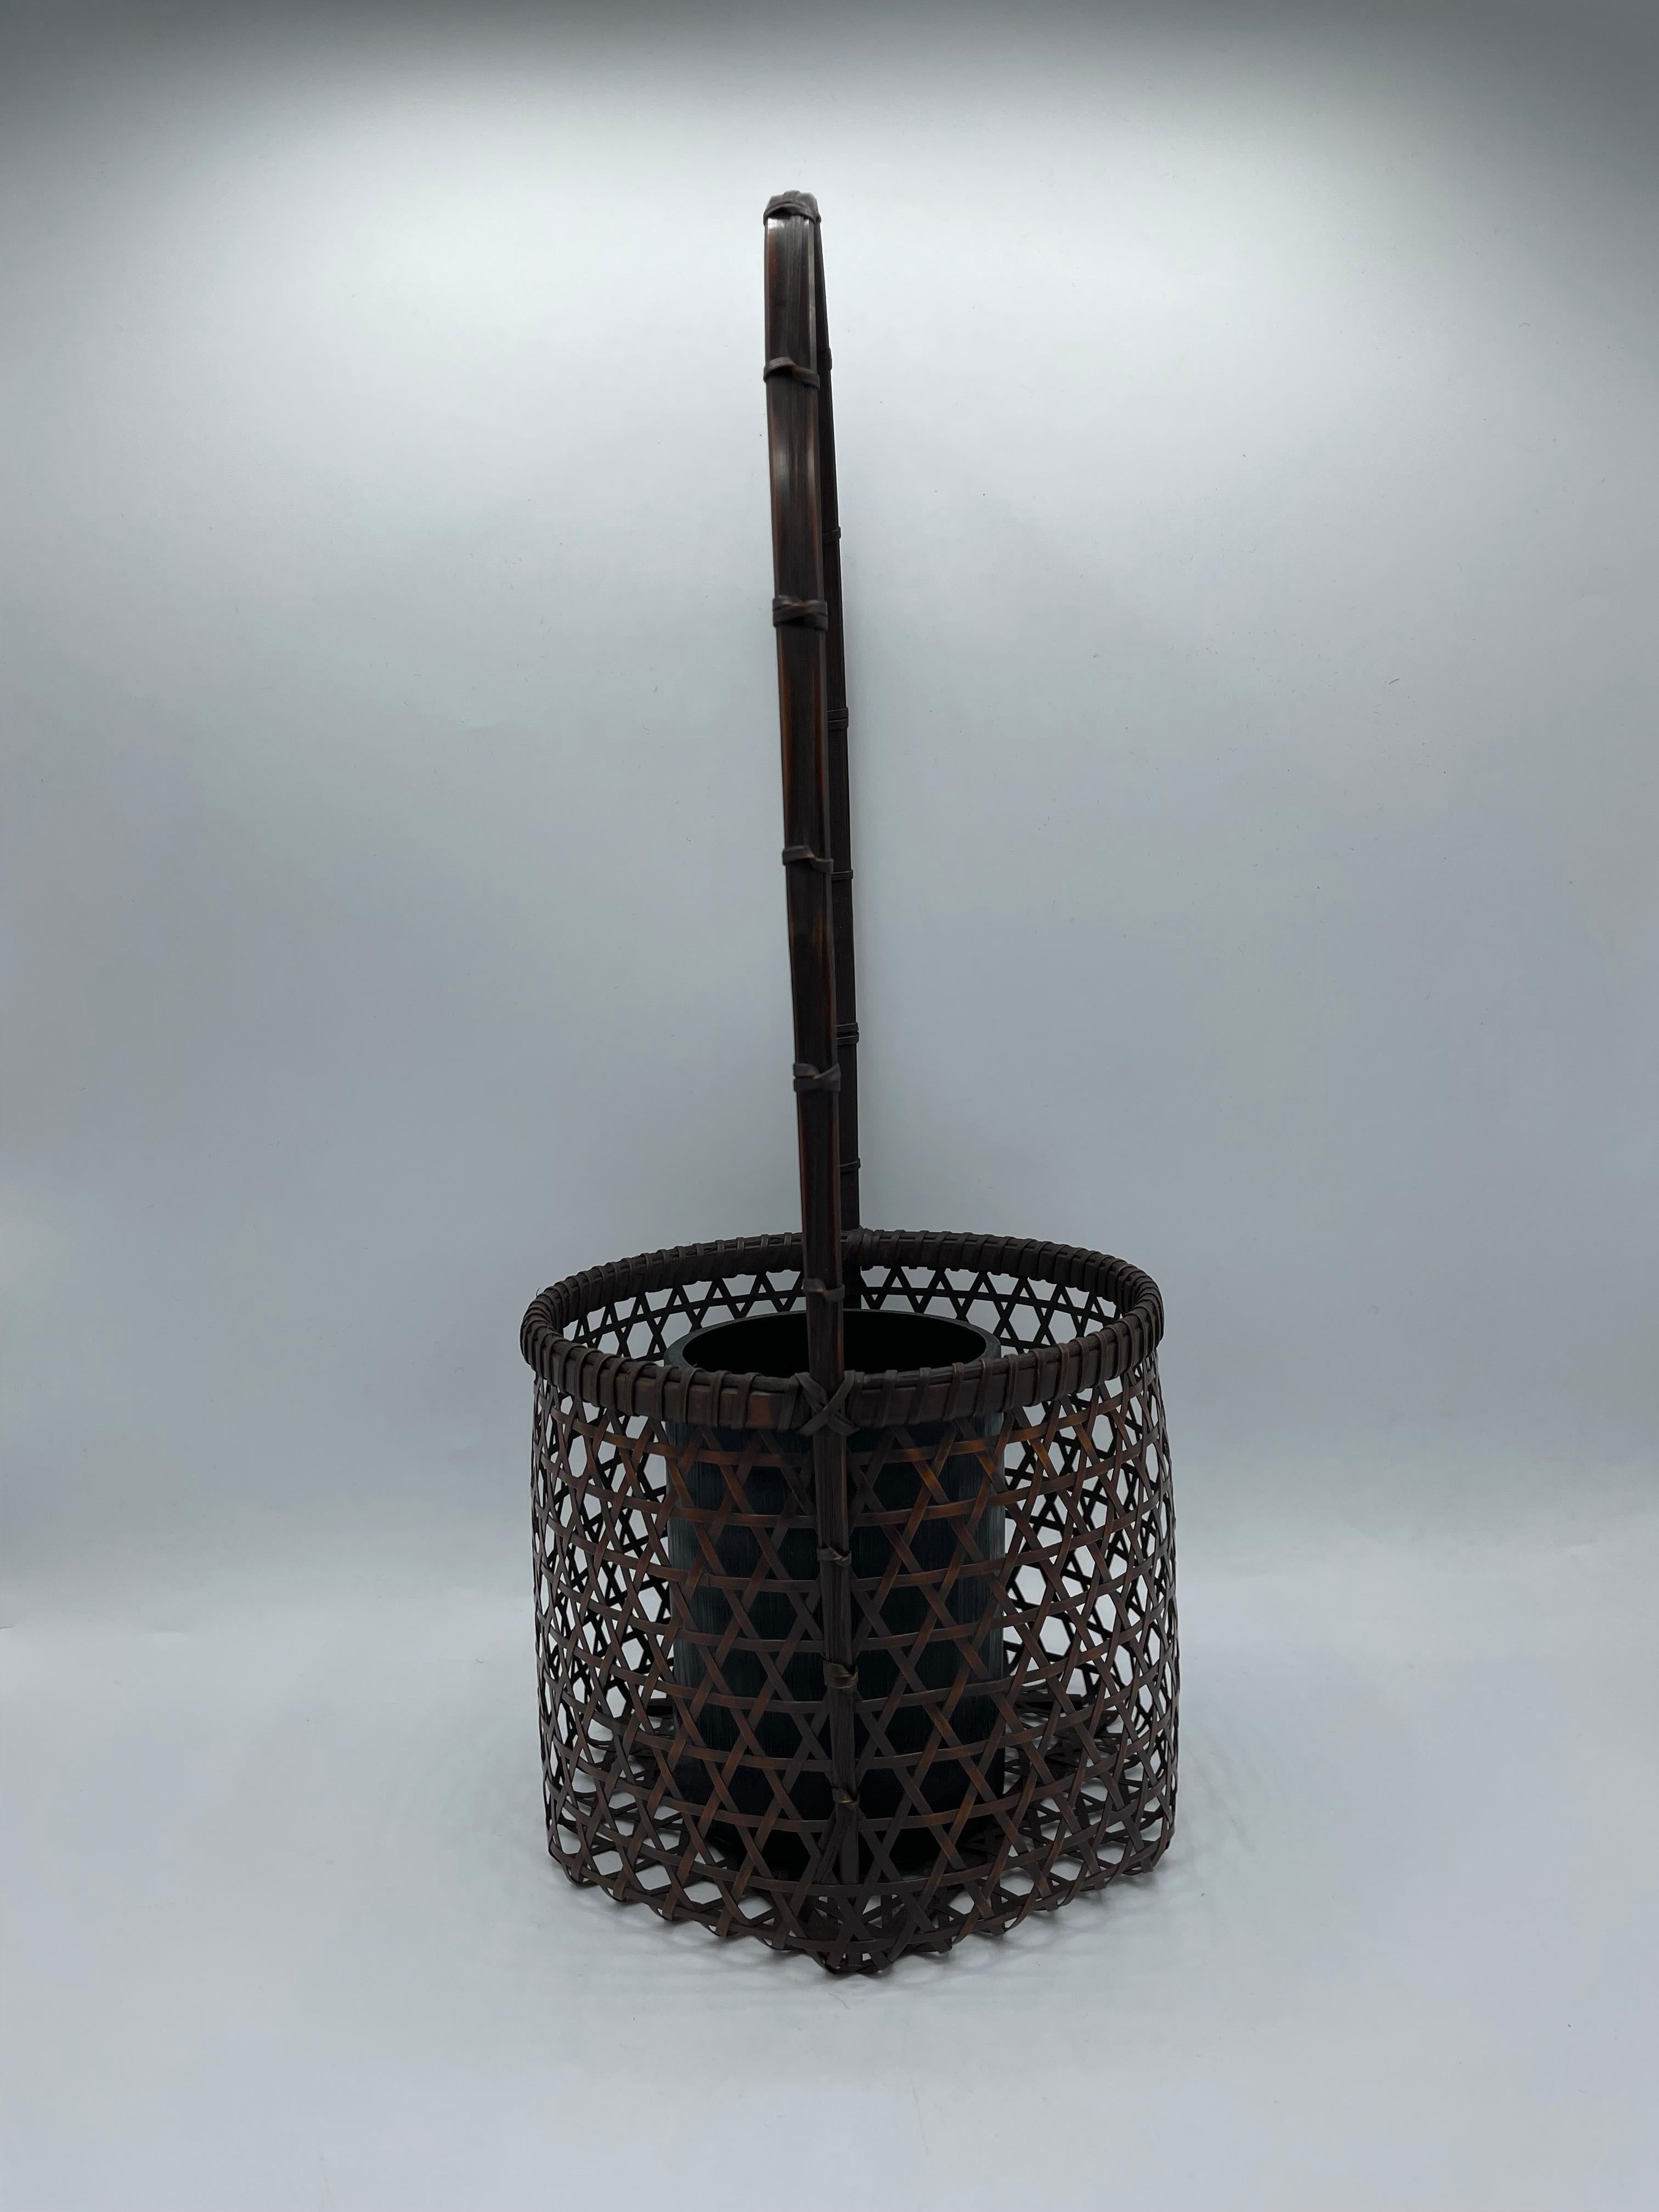 This is a bamboo basket which made around 1970s in Japan.
It was made by an artist called 'Kikusen'. His signature is carved on the bottom of this basket. His artist name is Kikusen Edodaikagura.
This can be used as basket and also flower vase.
This